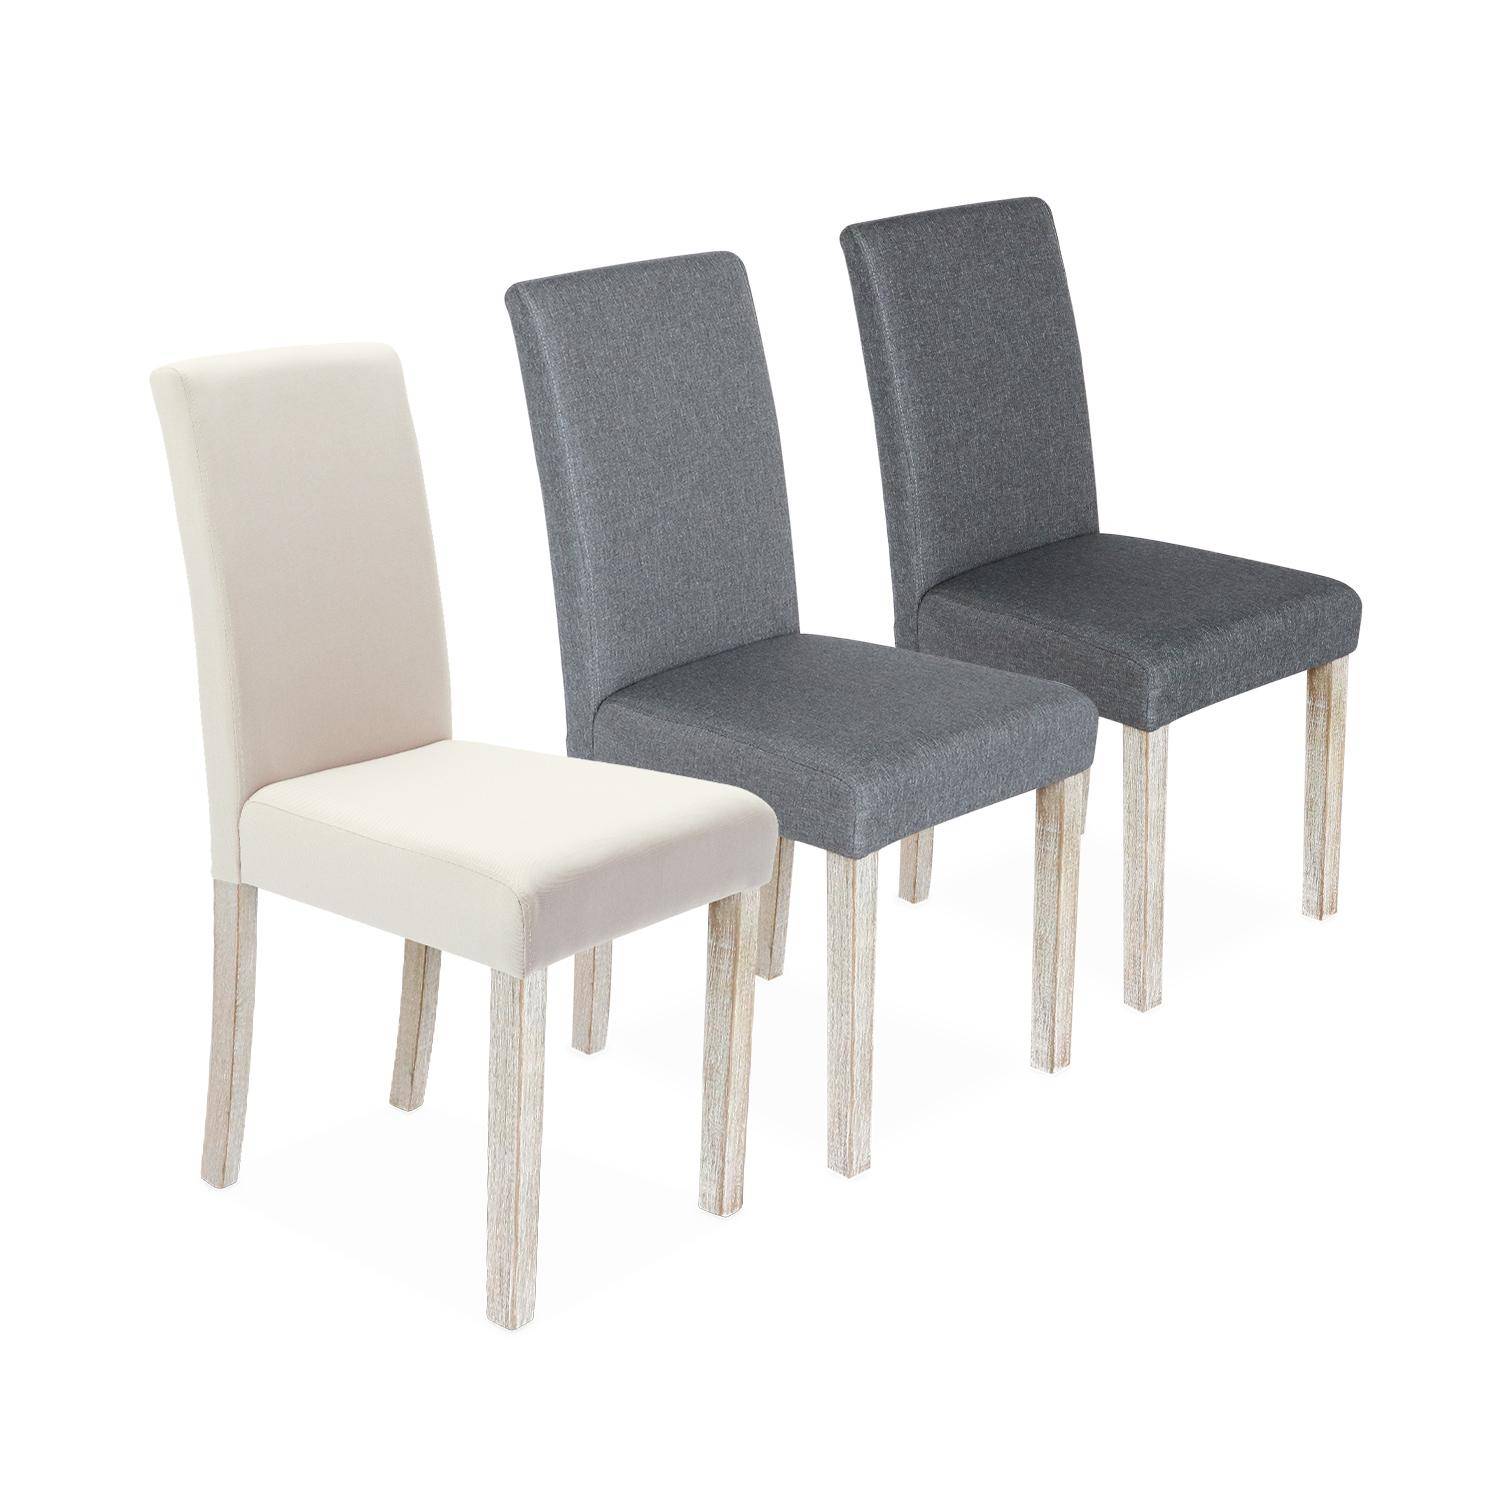 Set of 4 fabric dining chairs with wooden legs - Rita - Beige,sweeek,Photo5